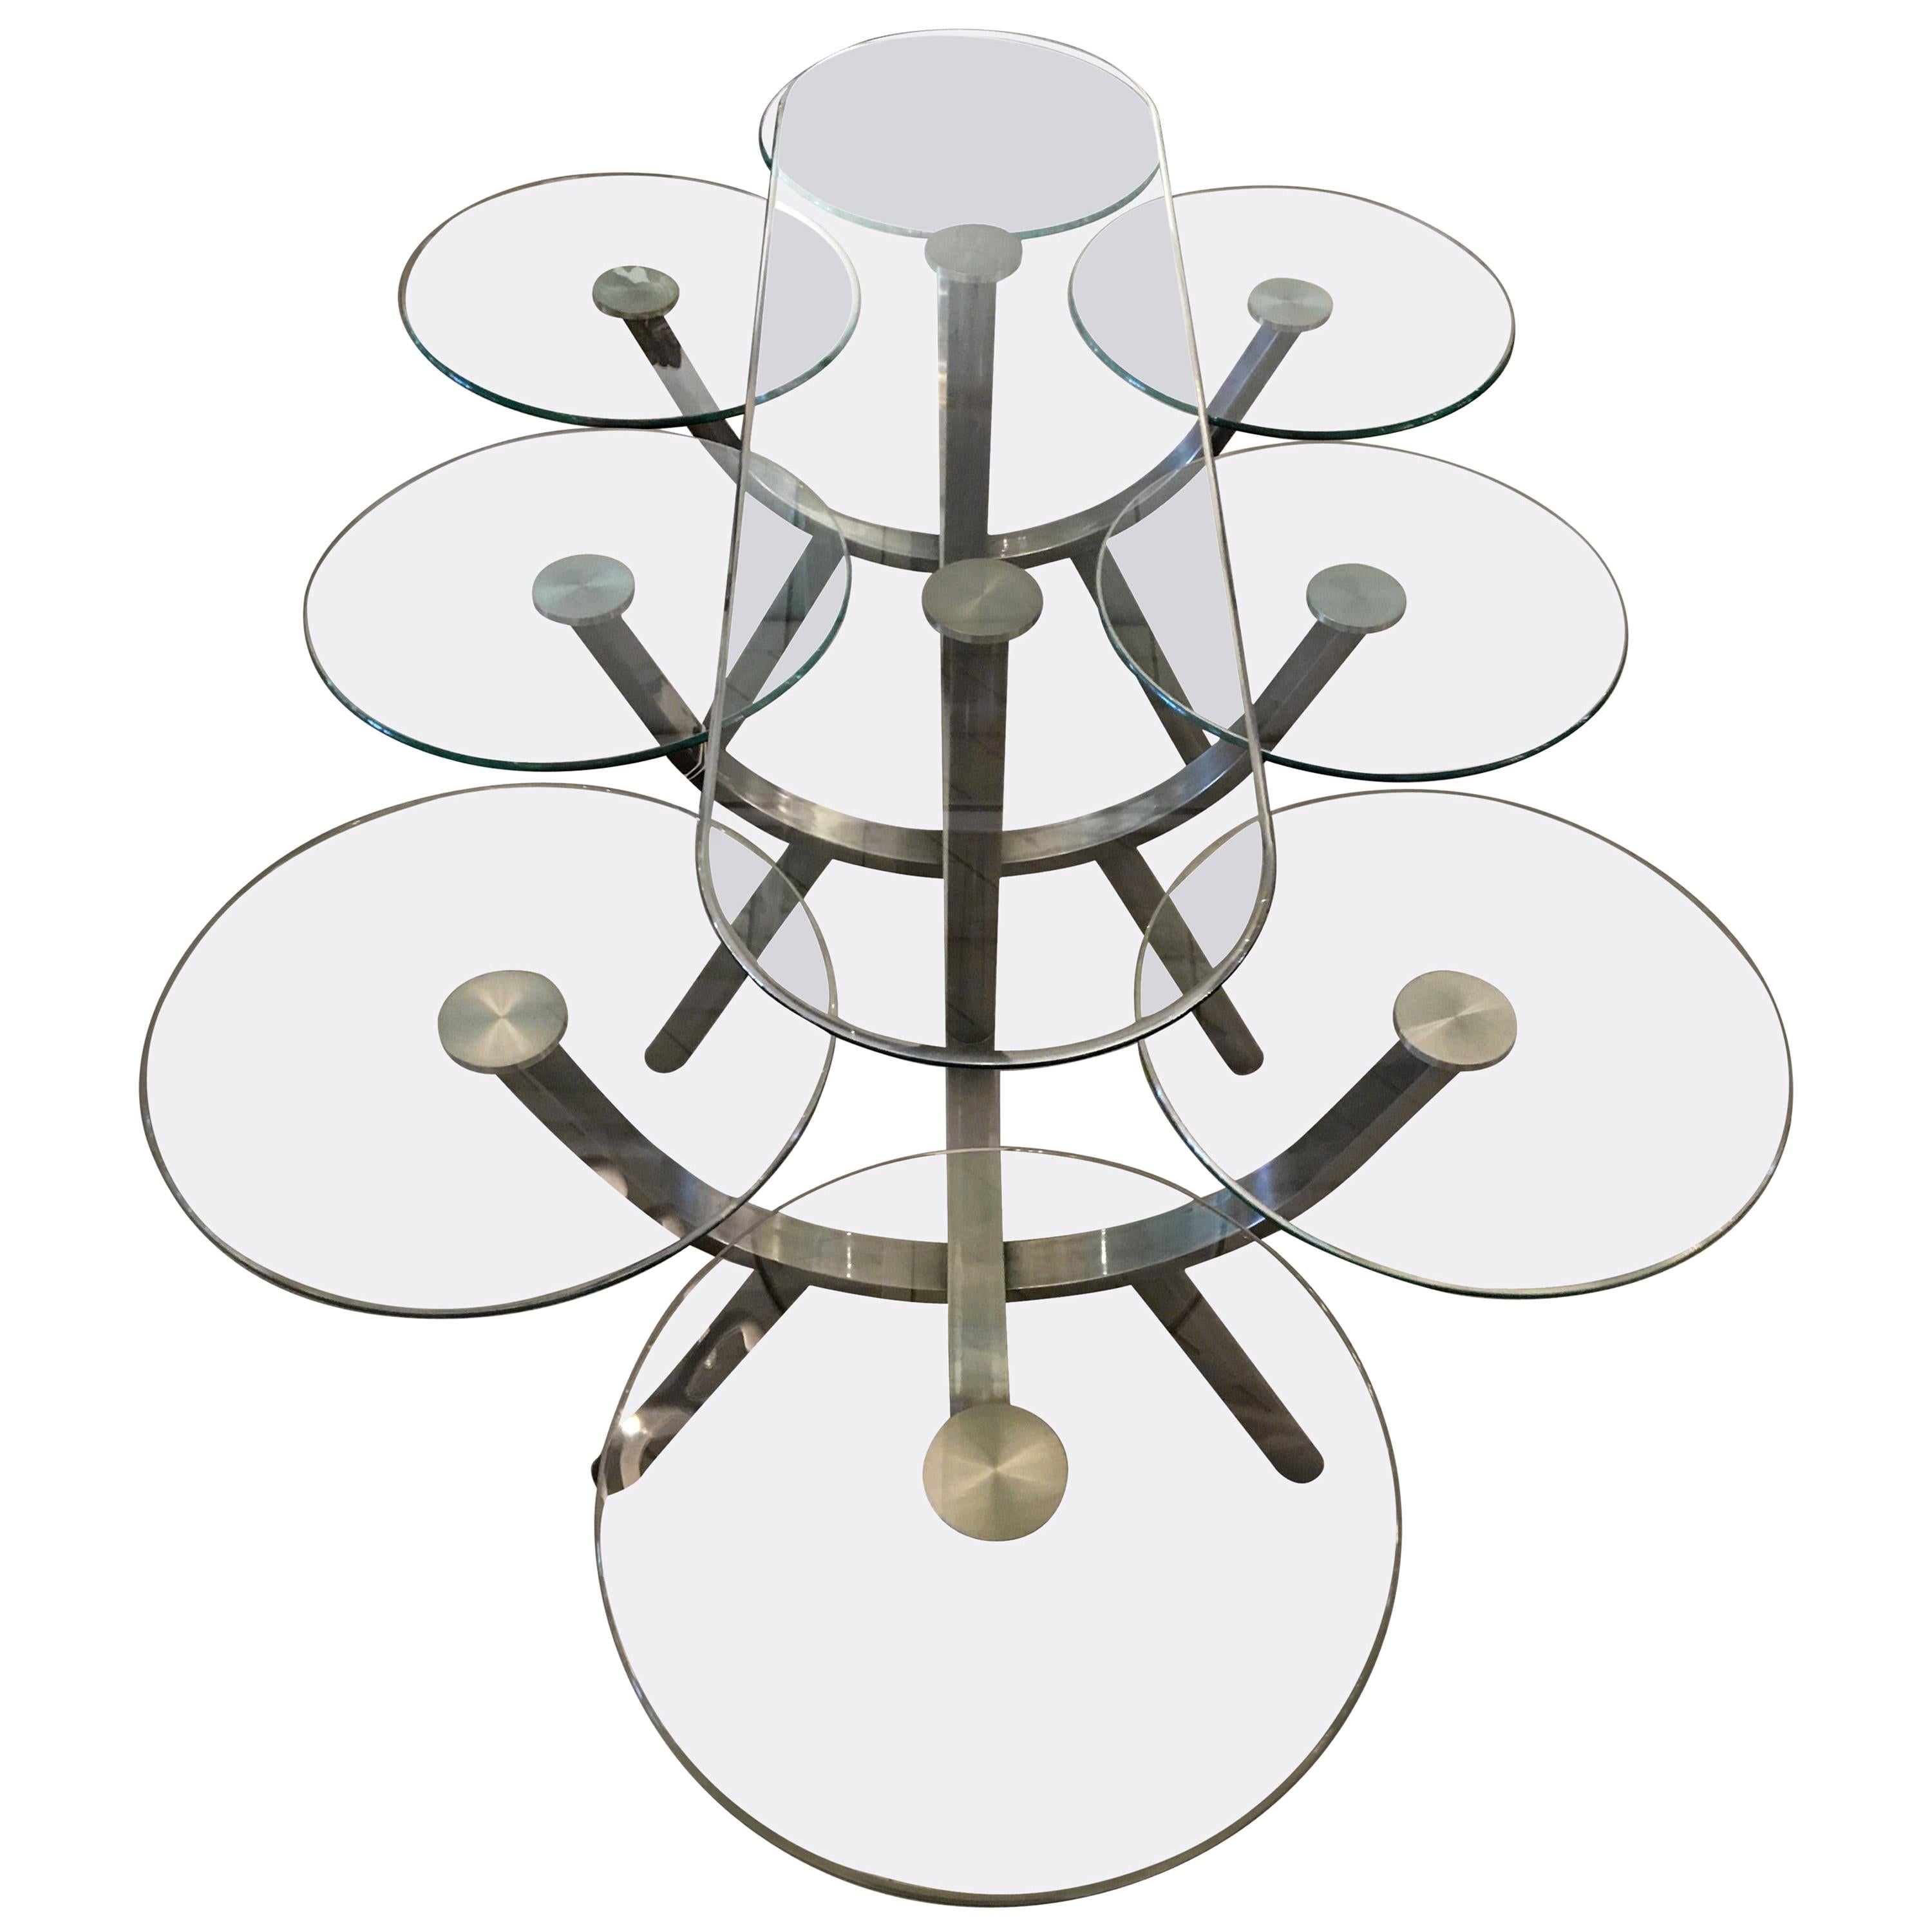 Design Institute of America Circle of Life Table For Sale